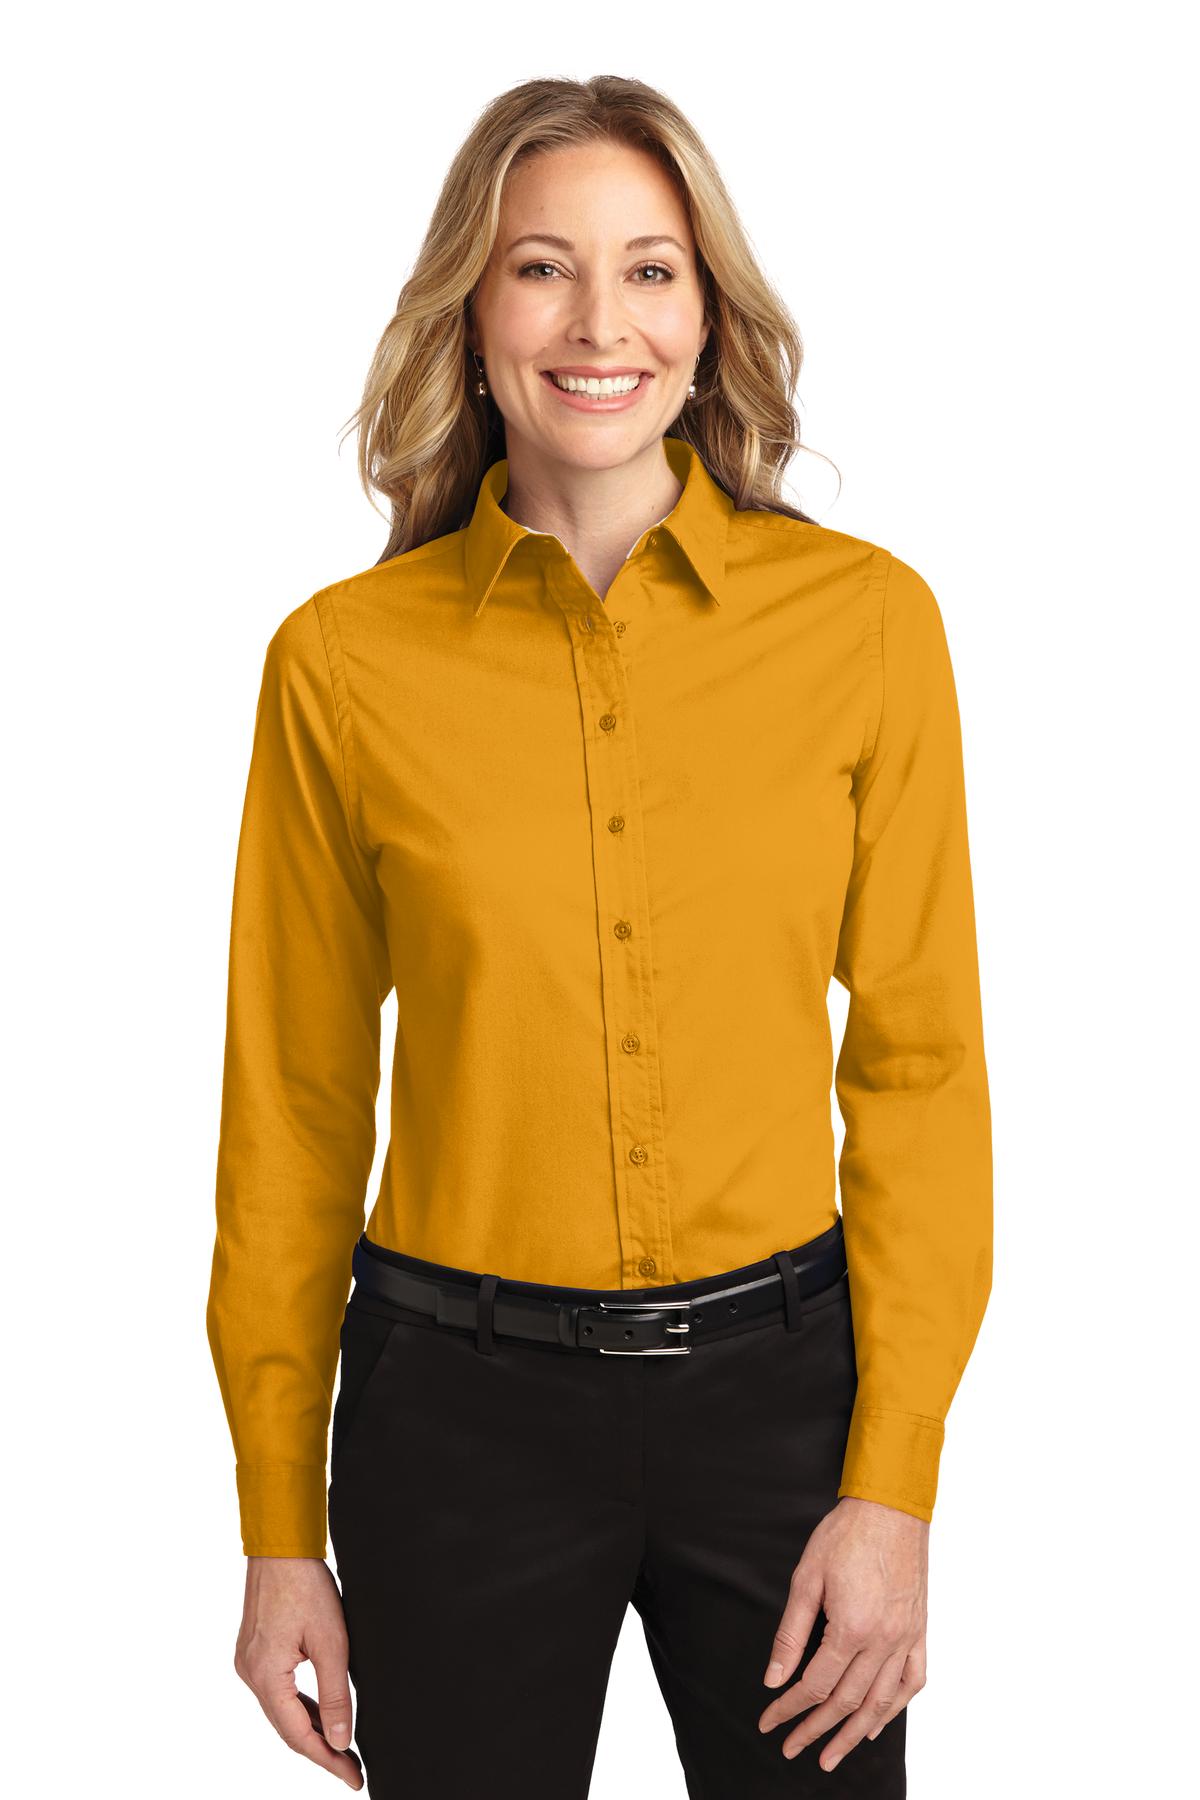 Port Authority Ladies Easy Care Long Sleeve Button Down Shirt - image 1 of 1